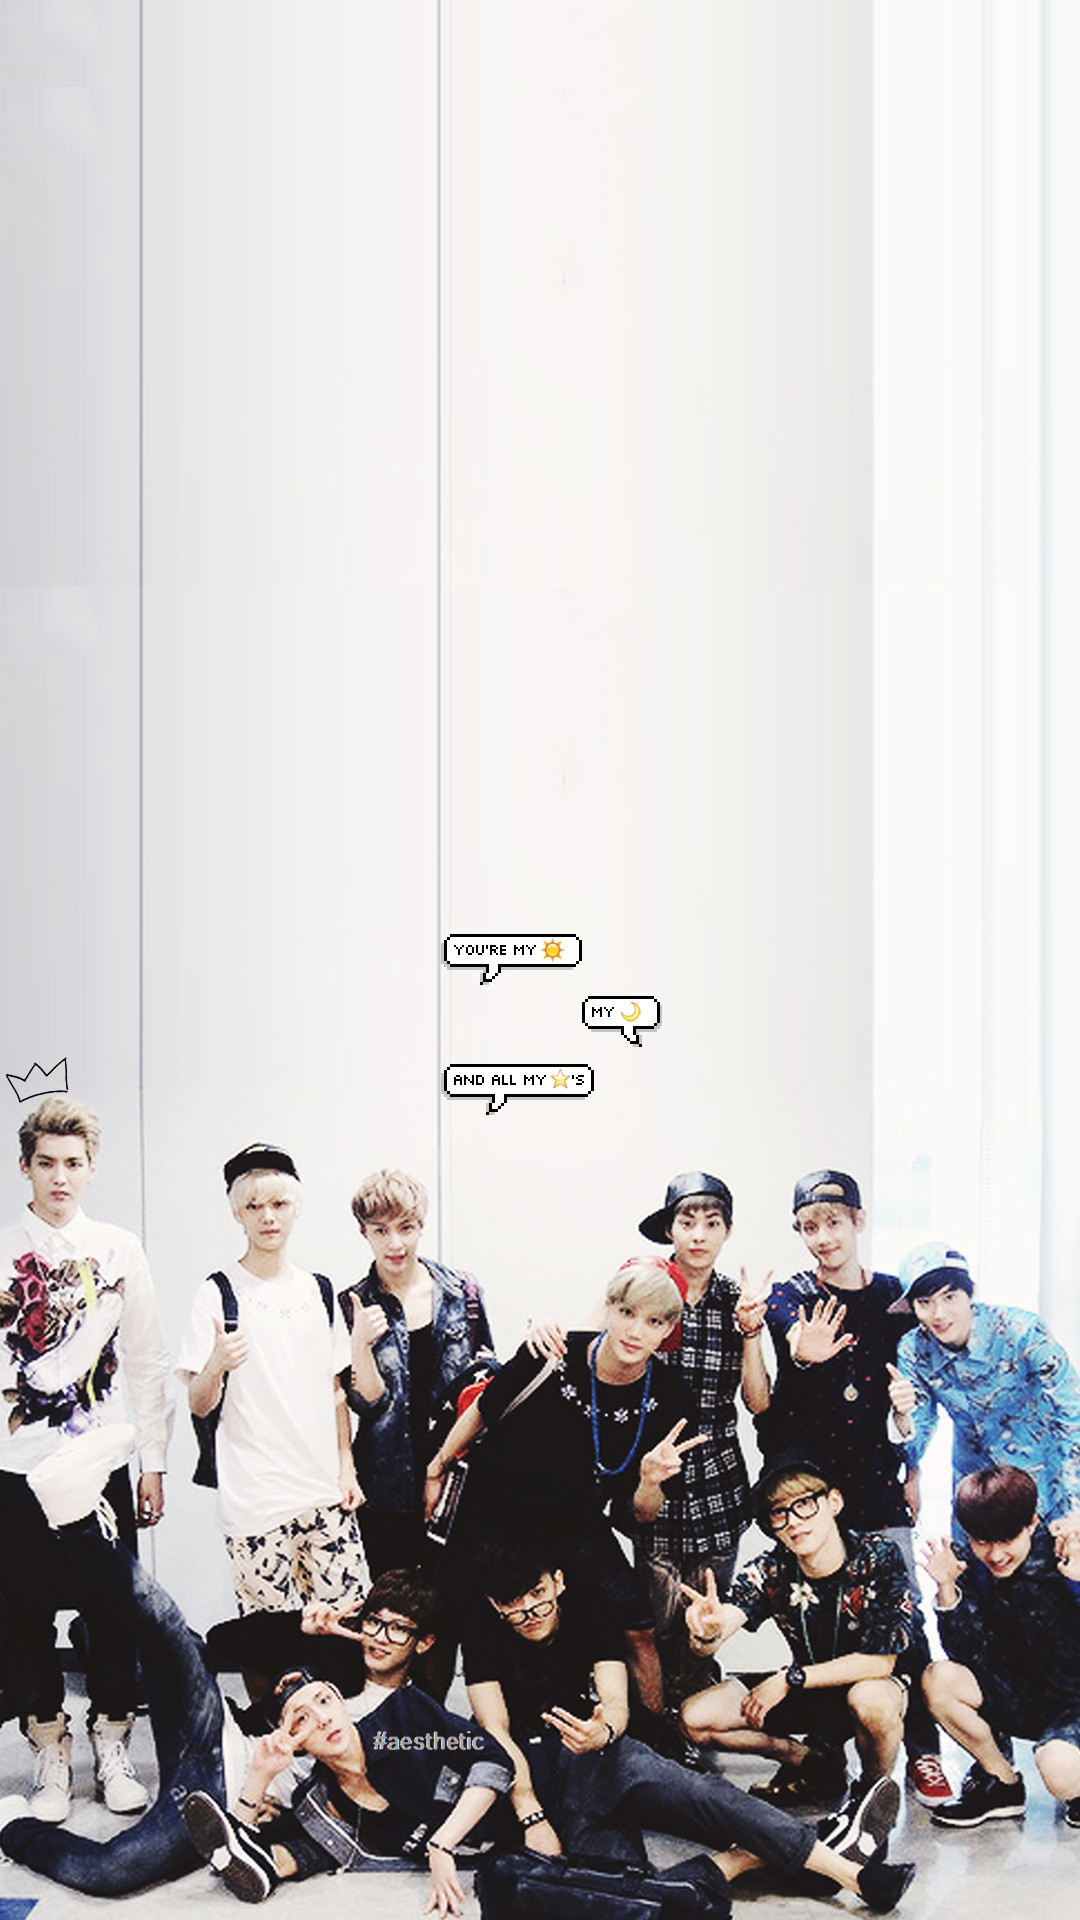 1080x1920 “exo ot12 iphone wallpapers (4) requested by @parknmychanyeol | hey, here. “